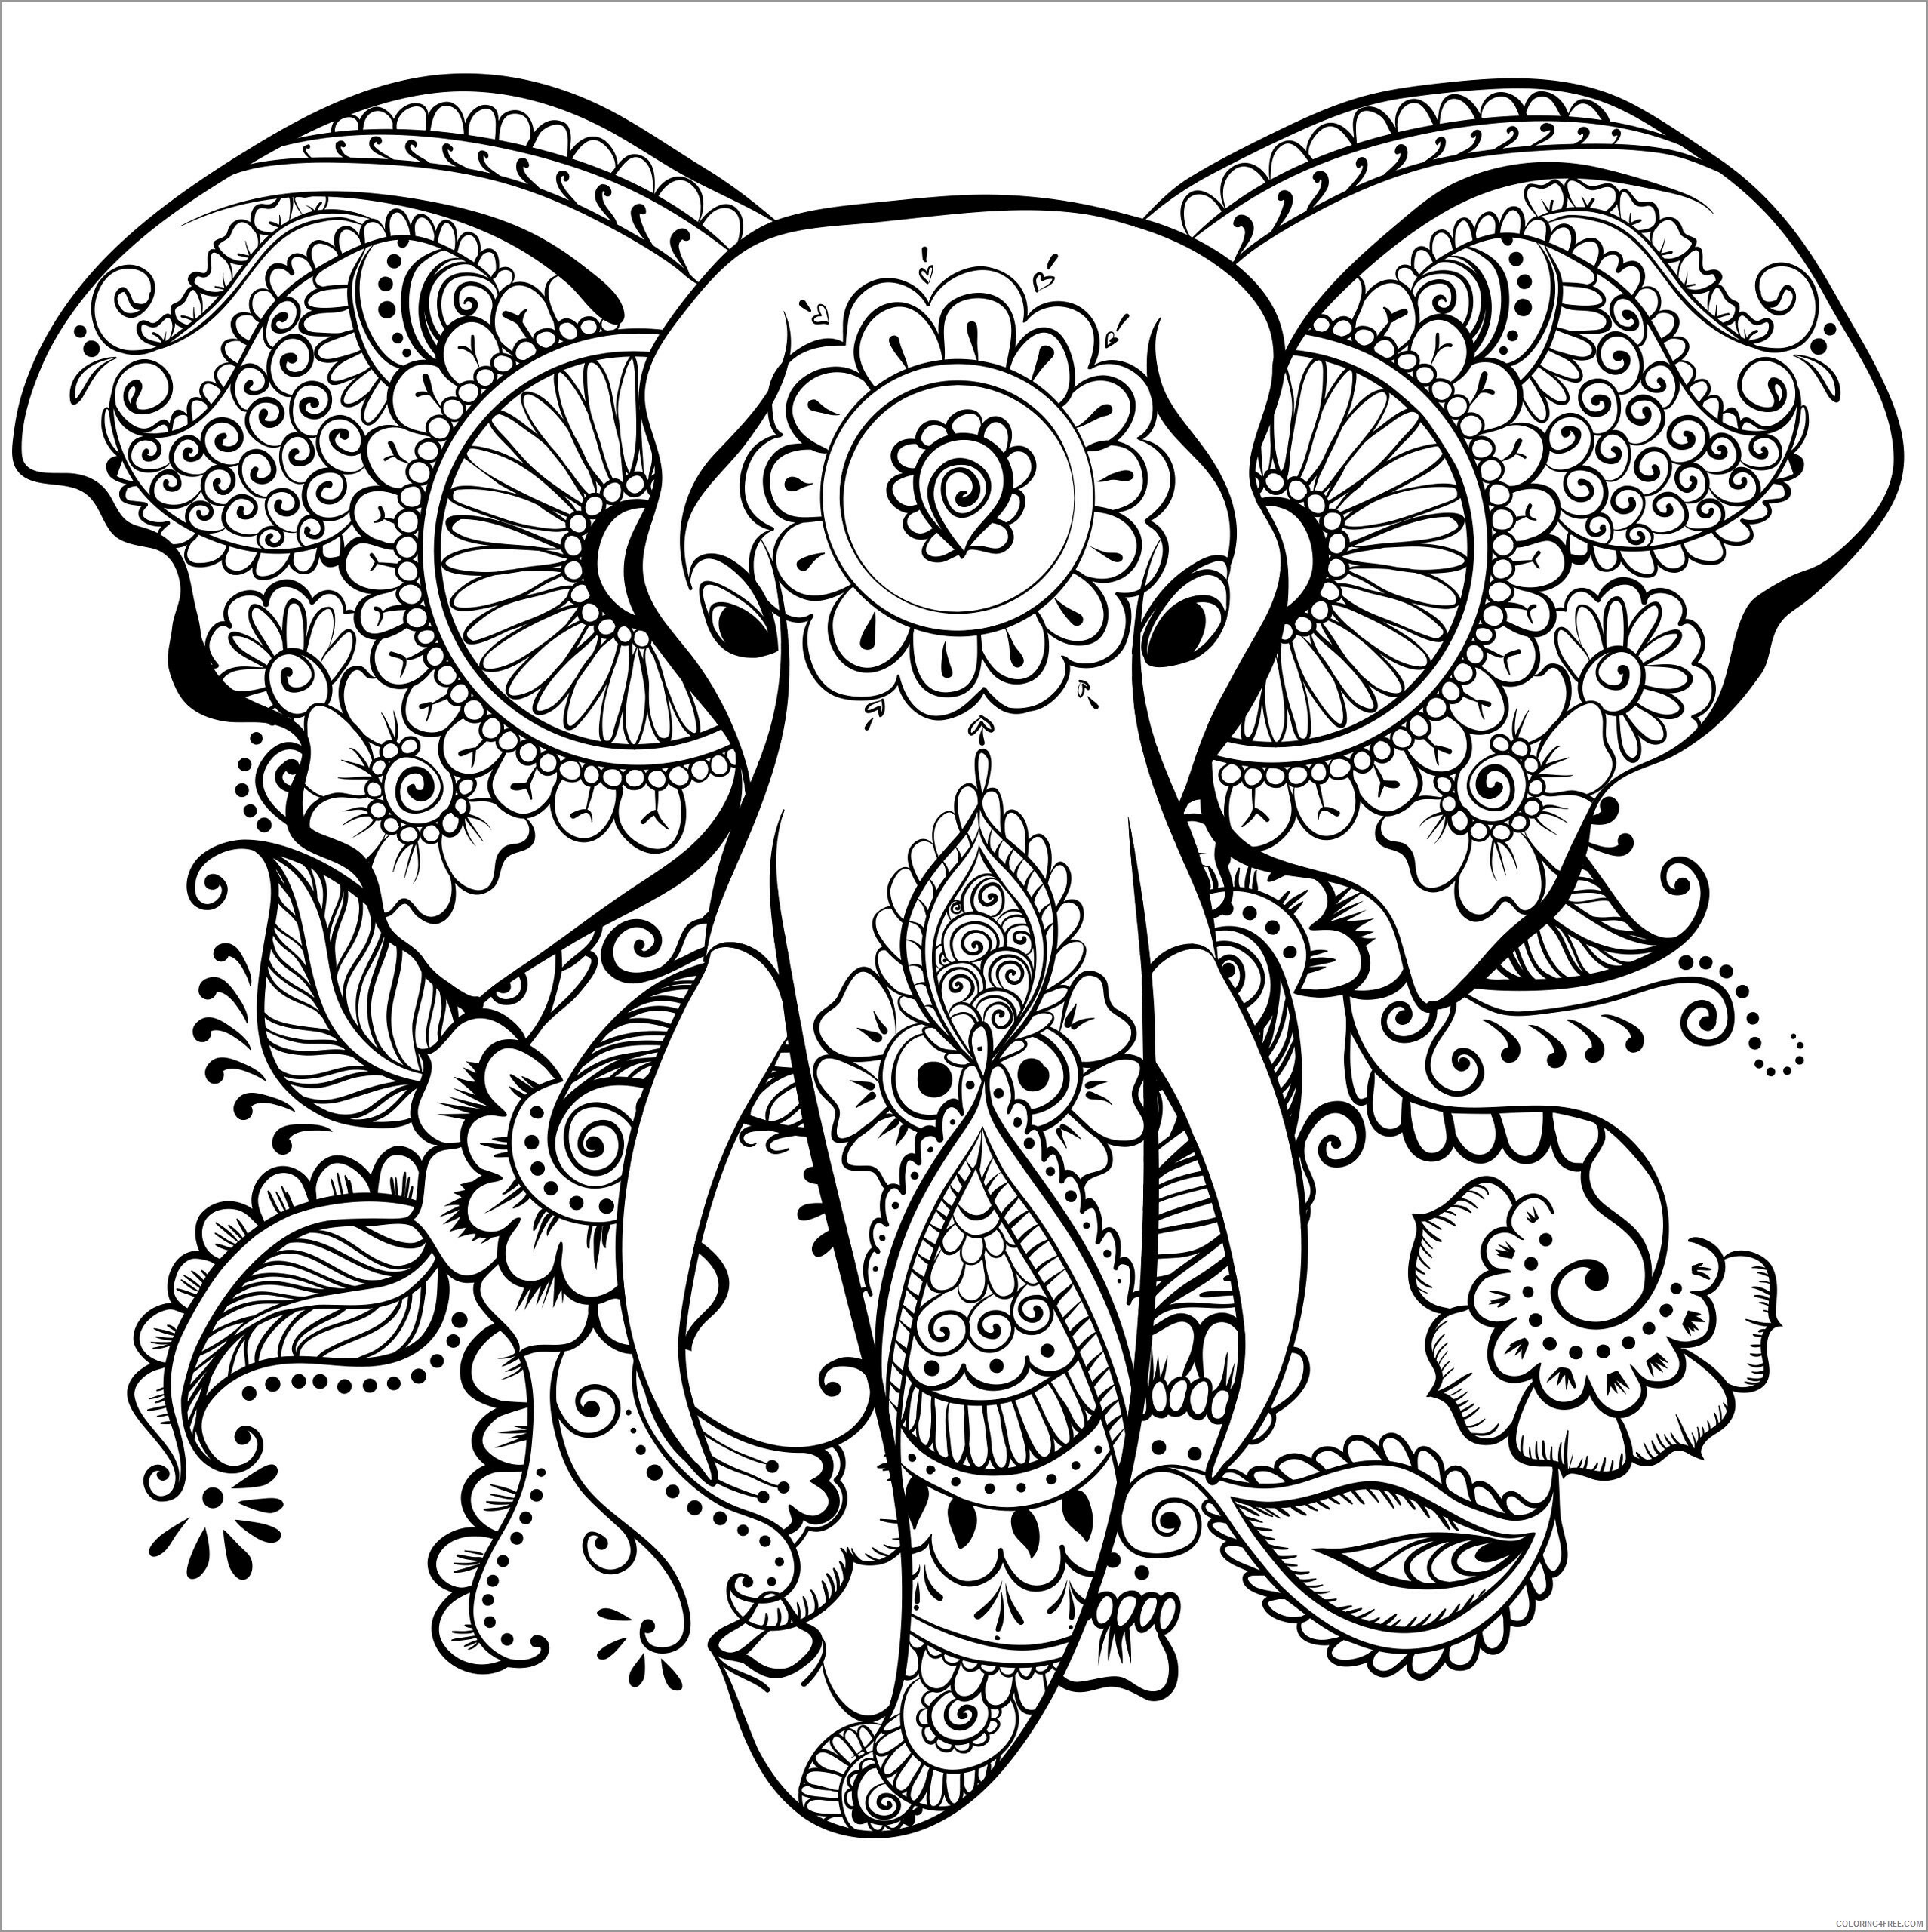 Coloring pages abstract coloring pages